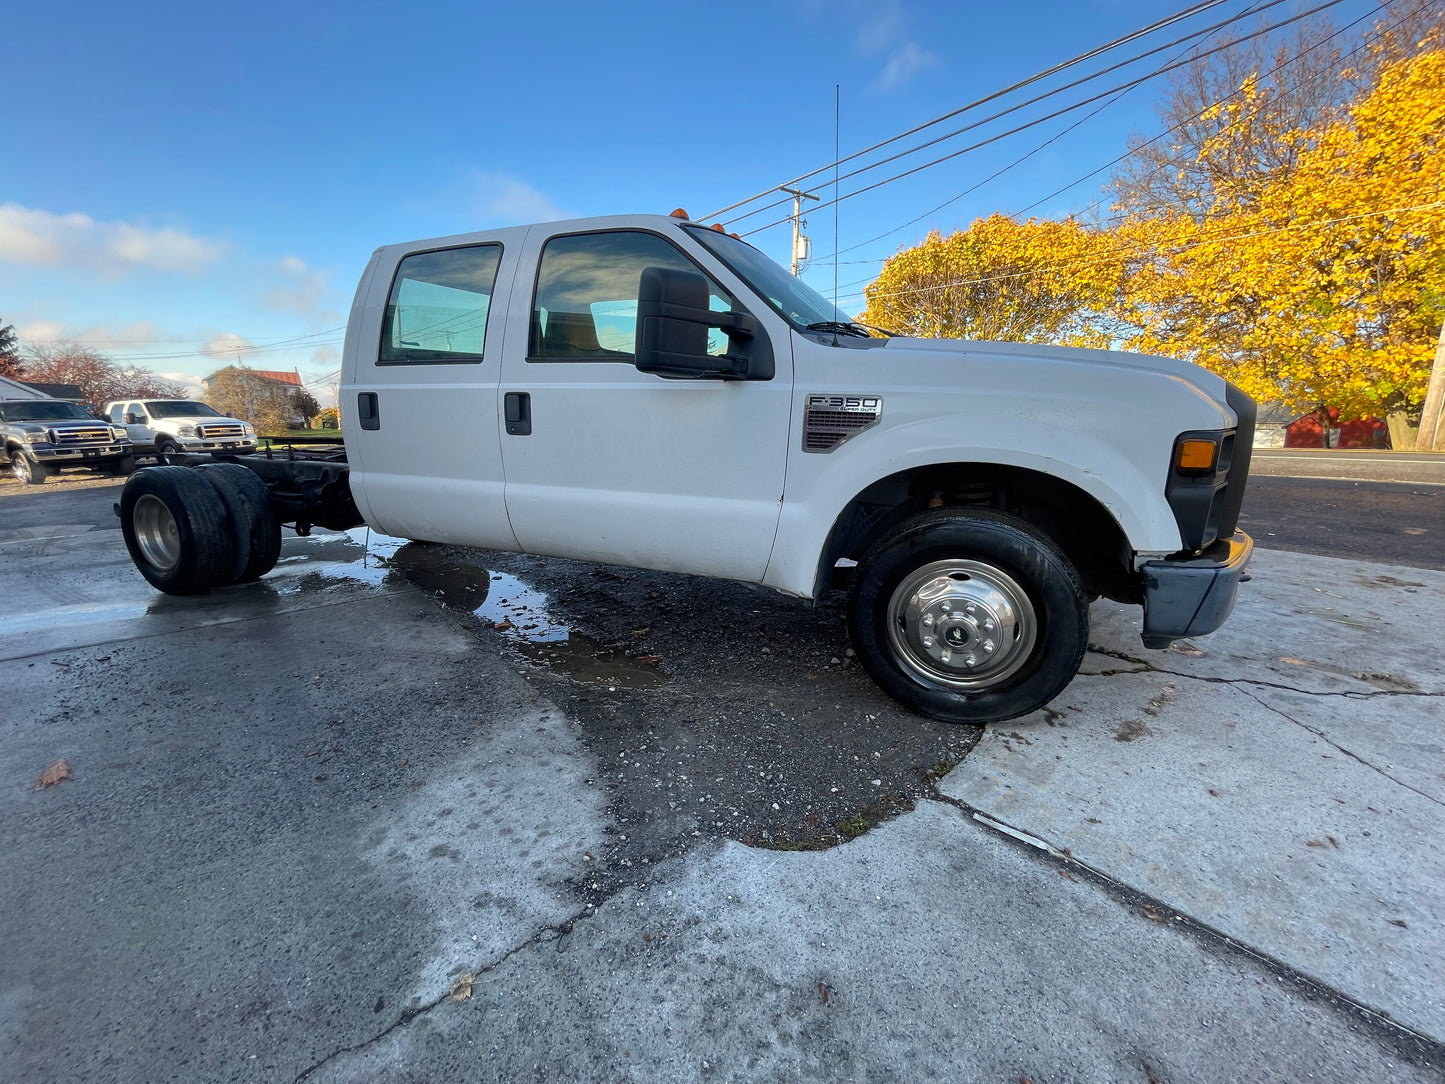 2008 Ford F350 2wd Cab & Chassis 6.4 Powerstroke 159K Miles- Clean Title